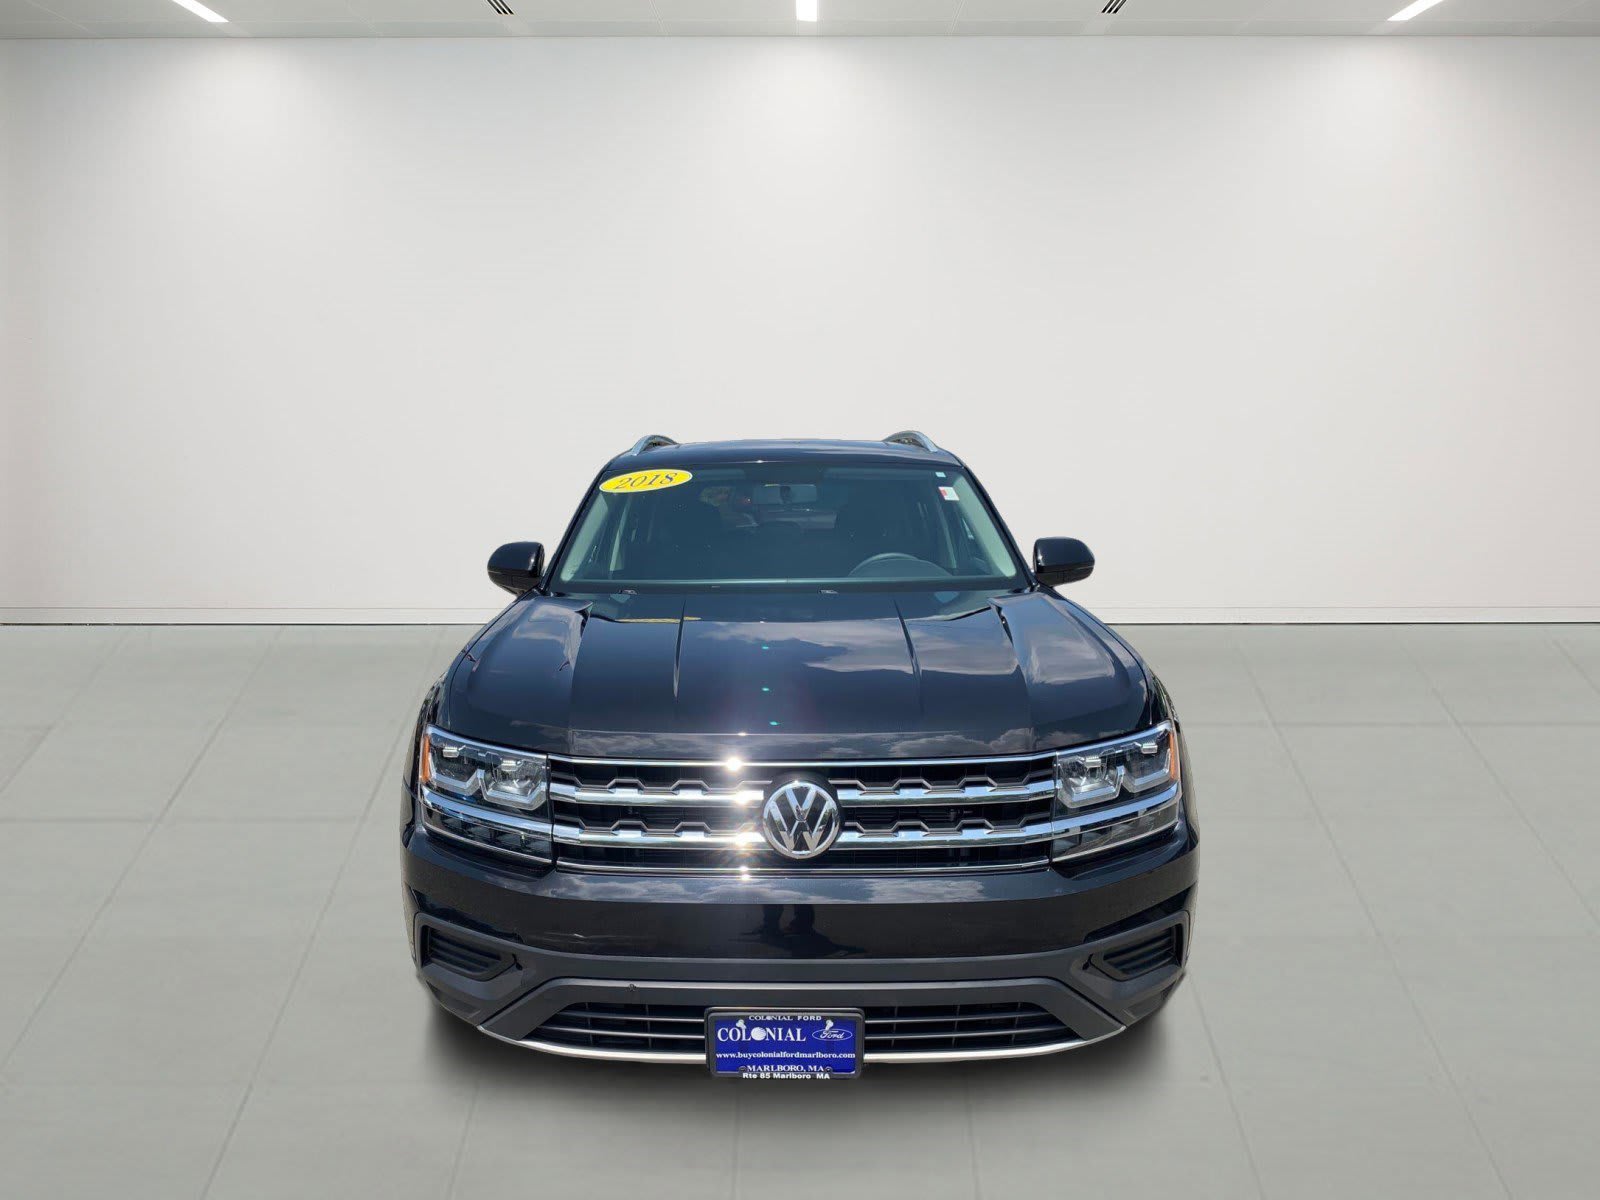 Used 2018 Volkswagen Atlas Launch Edition with VIN 1V2HR2CA2JC501480 for sale in Marlboro, MA